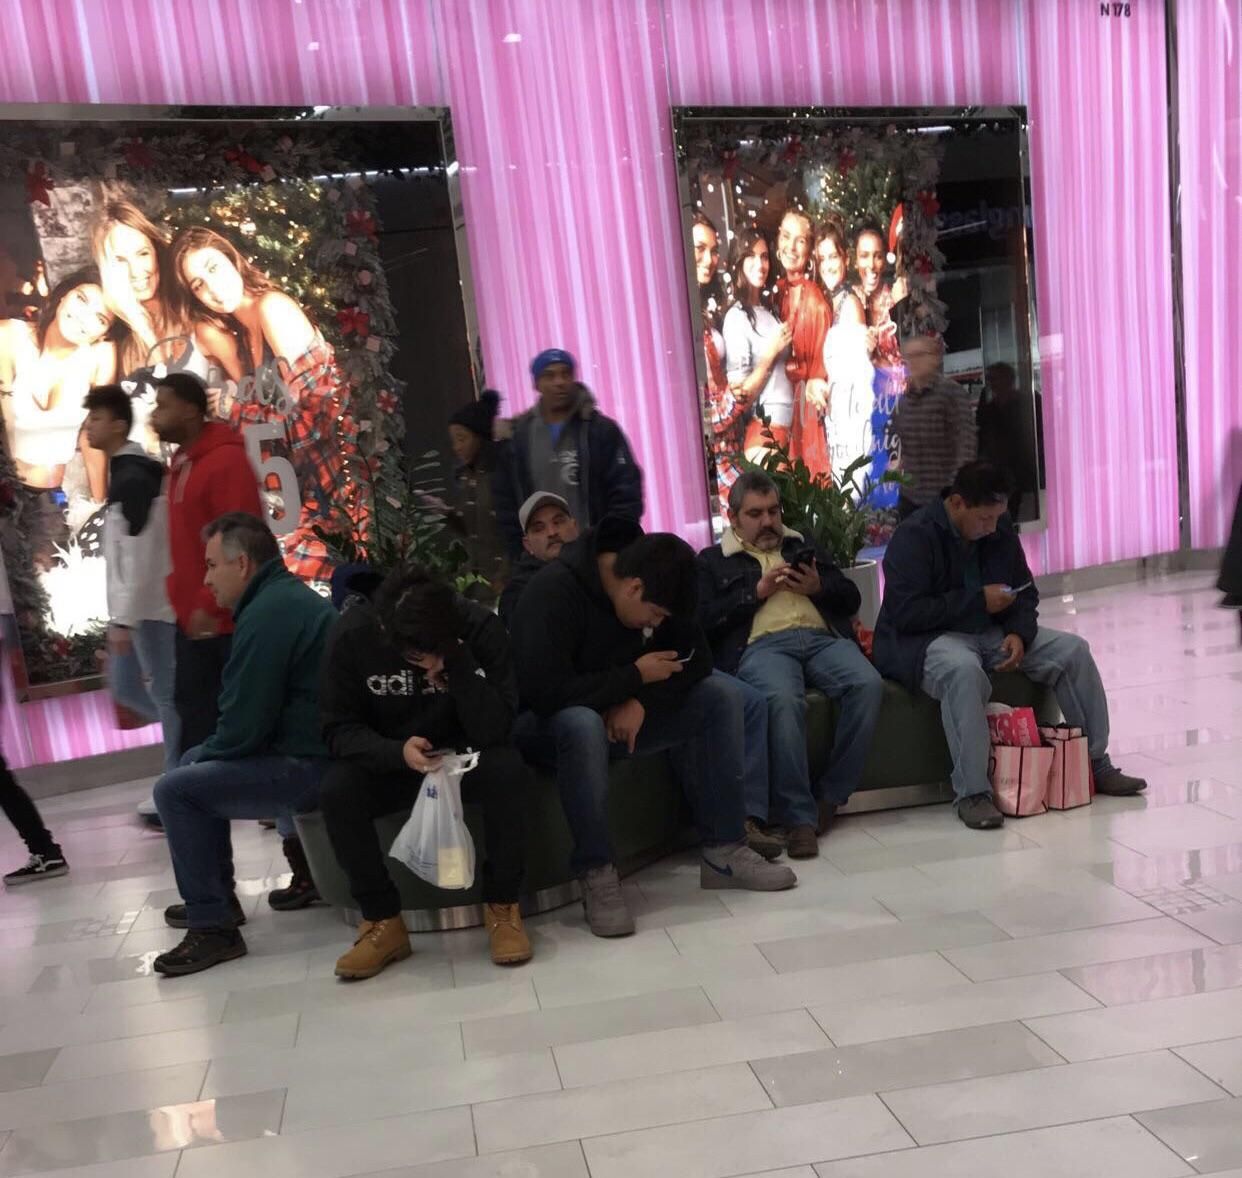 All the miserable men outside of Victoria’s Secret before the holidays.